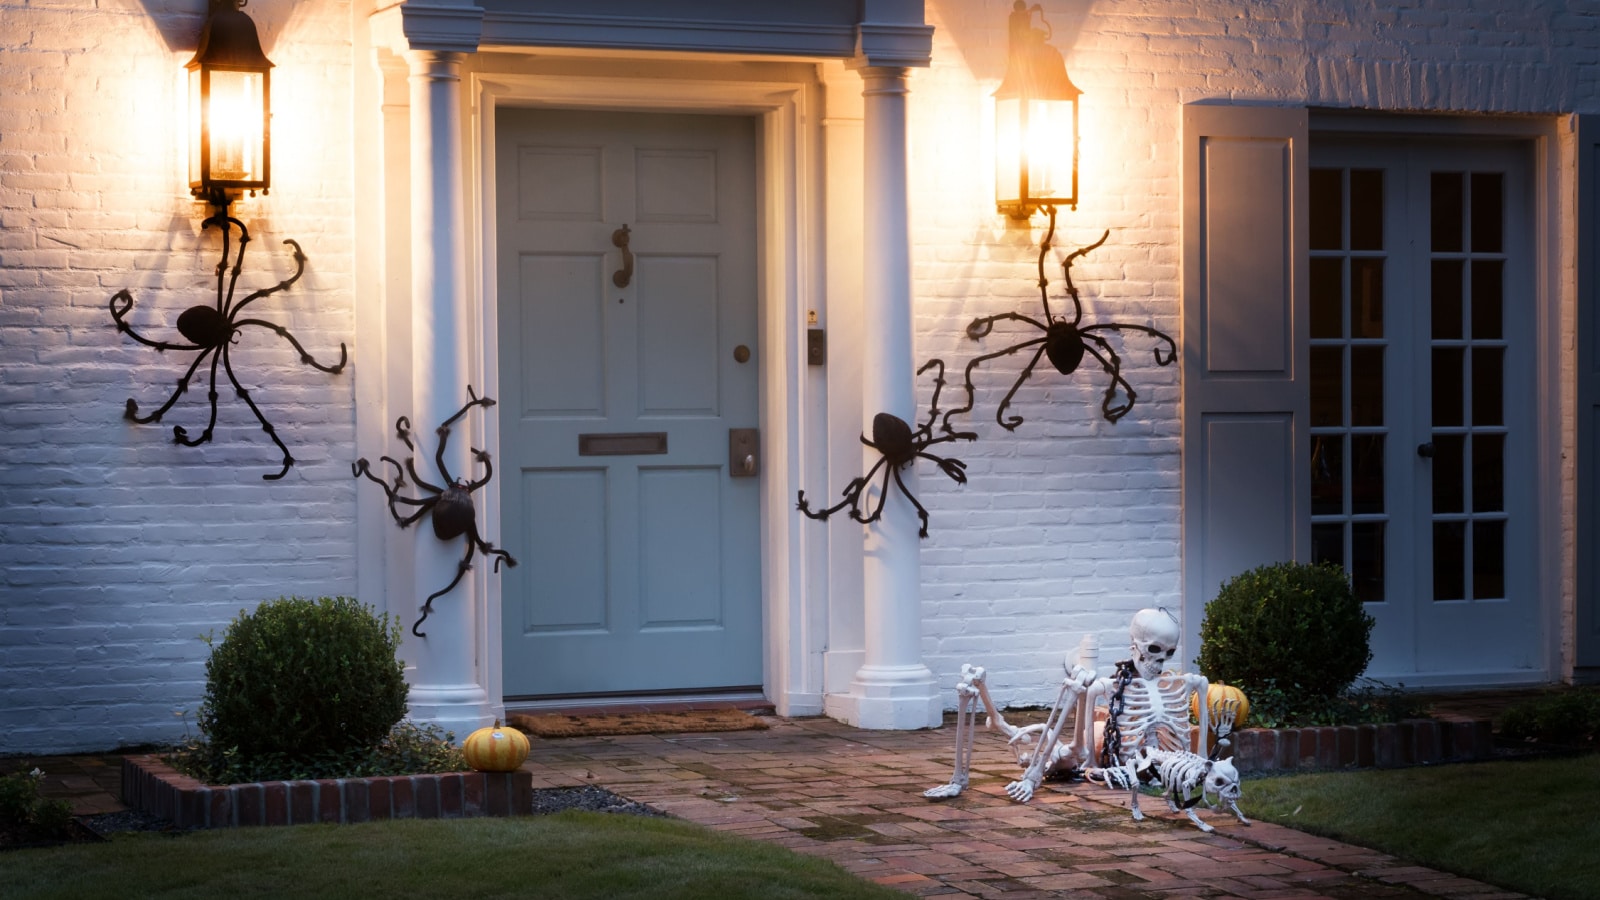 The house is decorated for Halloween: Huge black spiders crawl around the house, and on the path there is a resting human skeleton with the dog's skeleton.. Night, Houston, Texas, United States